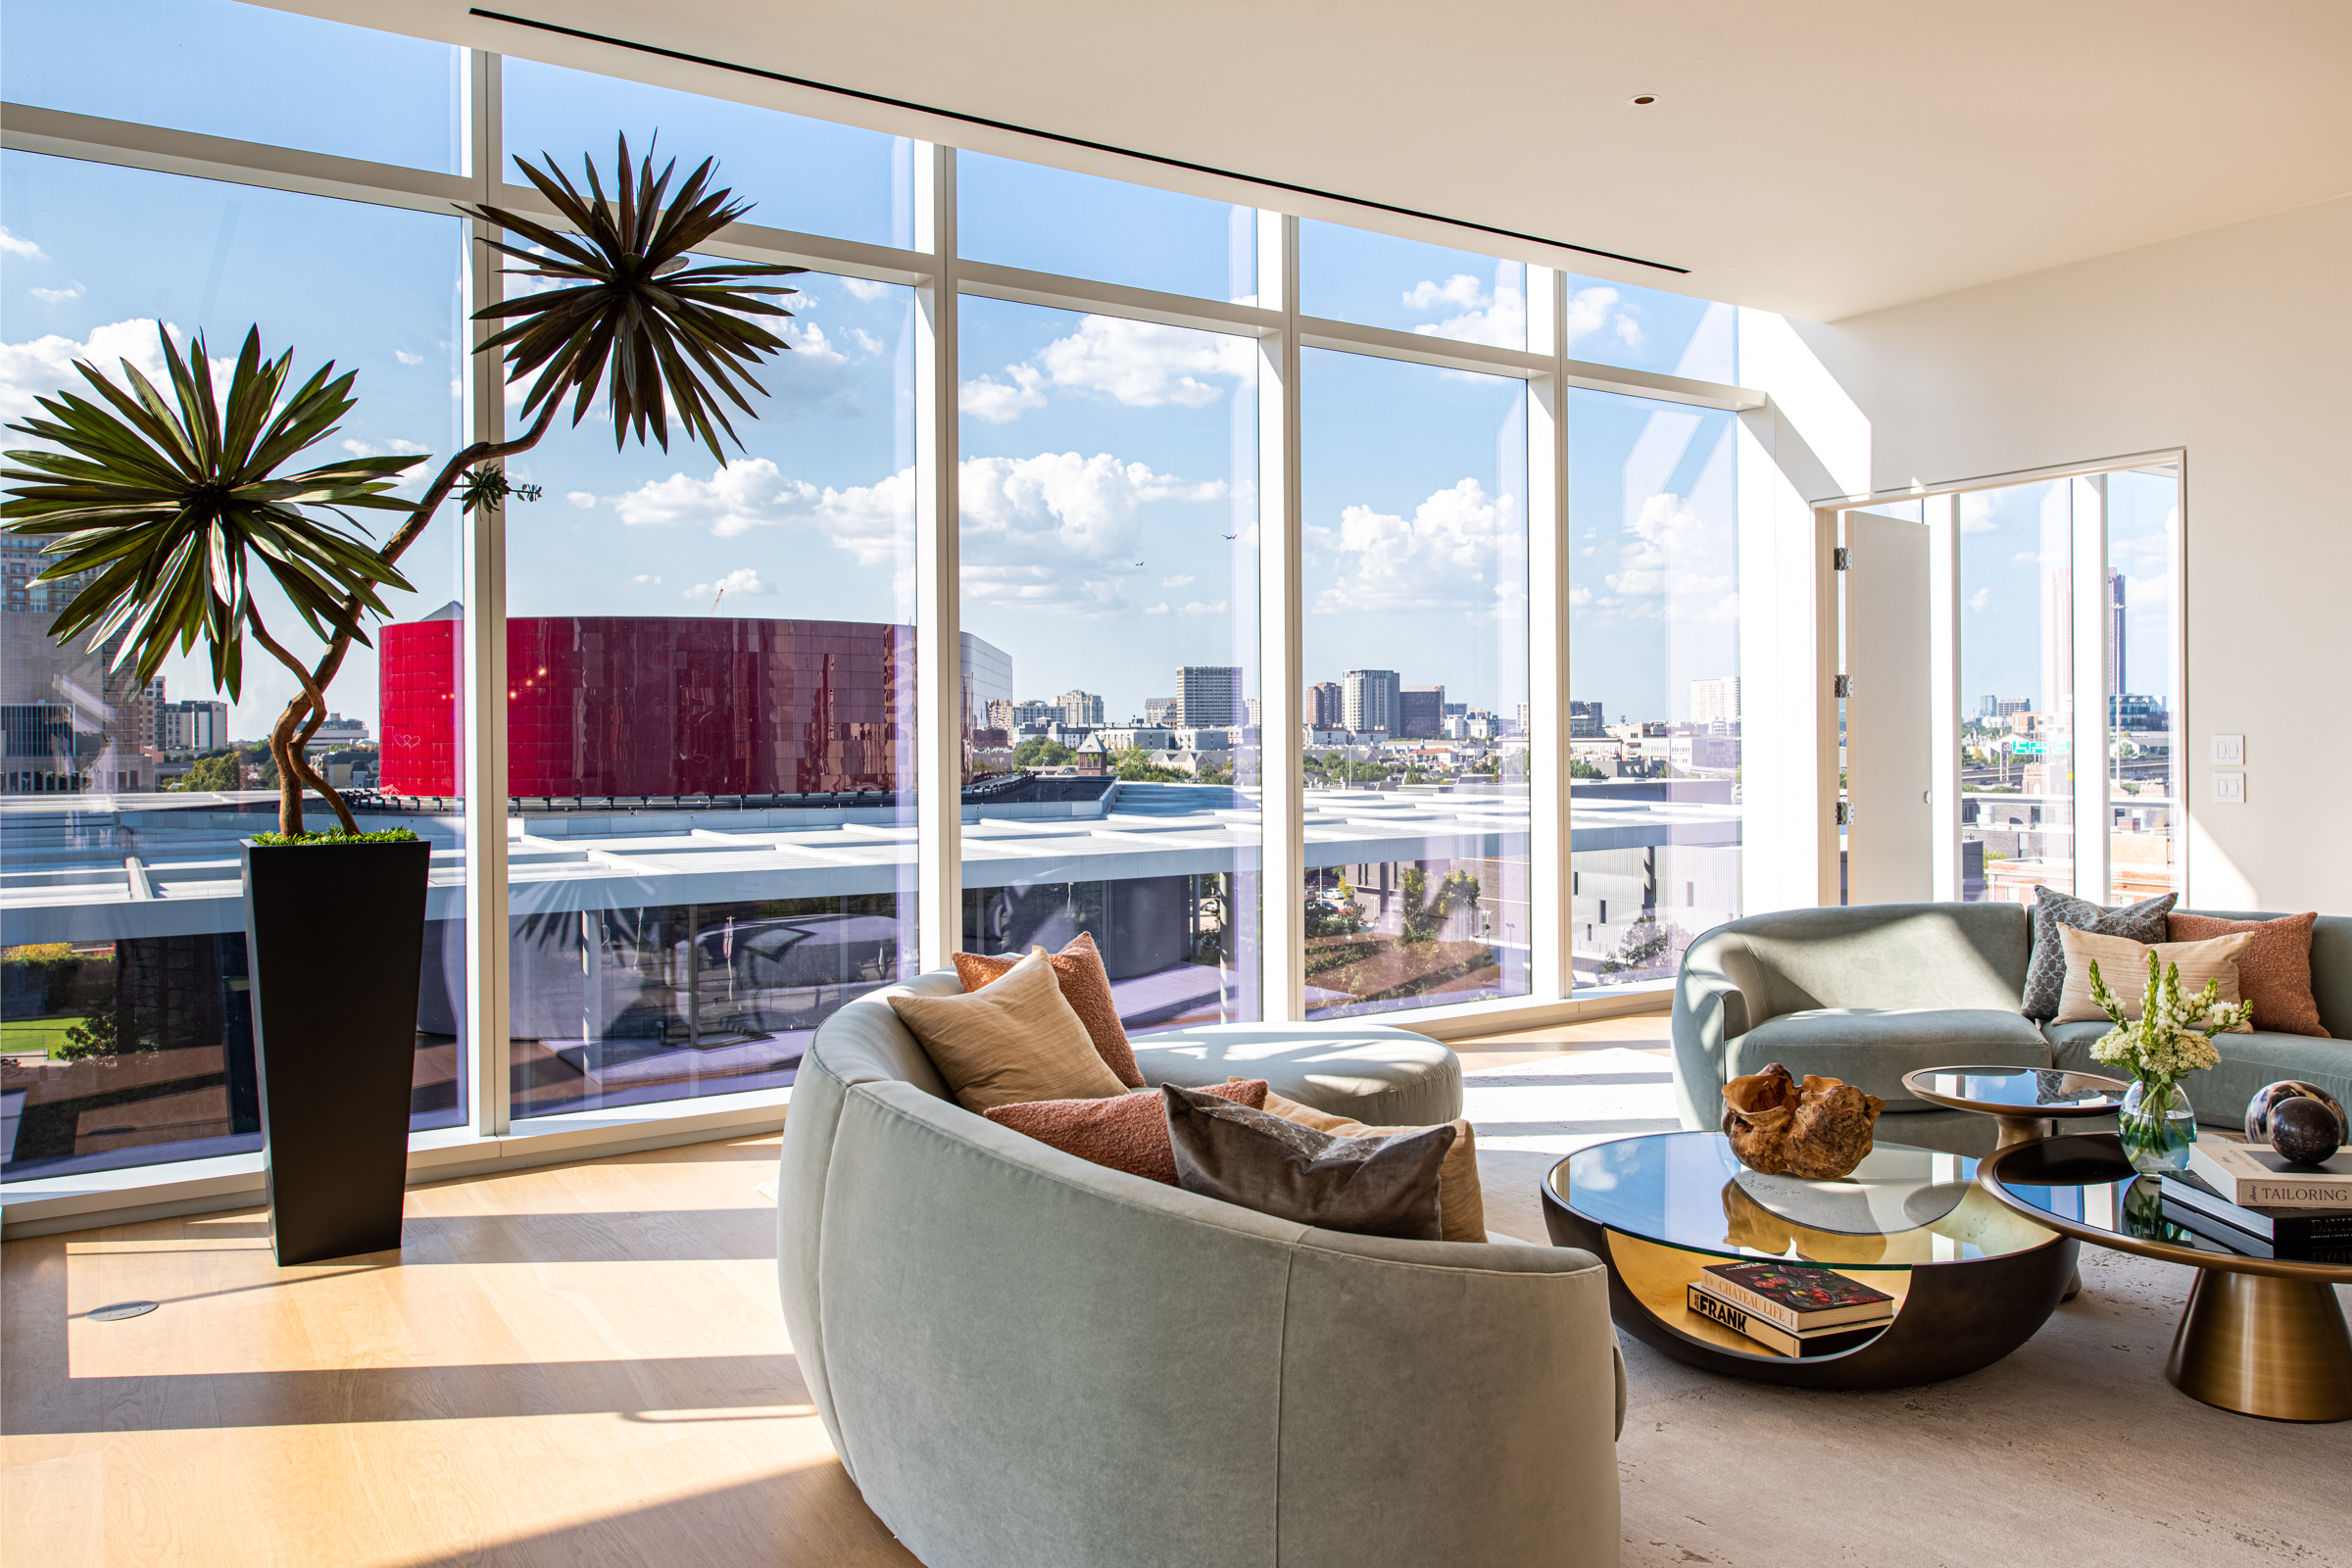 Living Room with sky view.